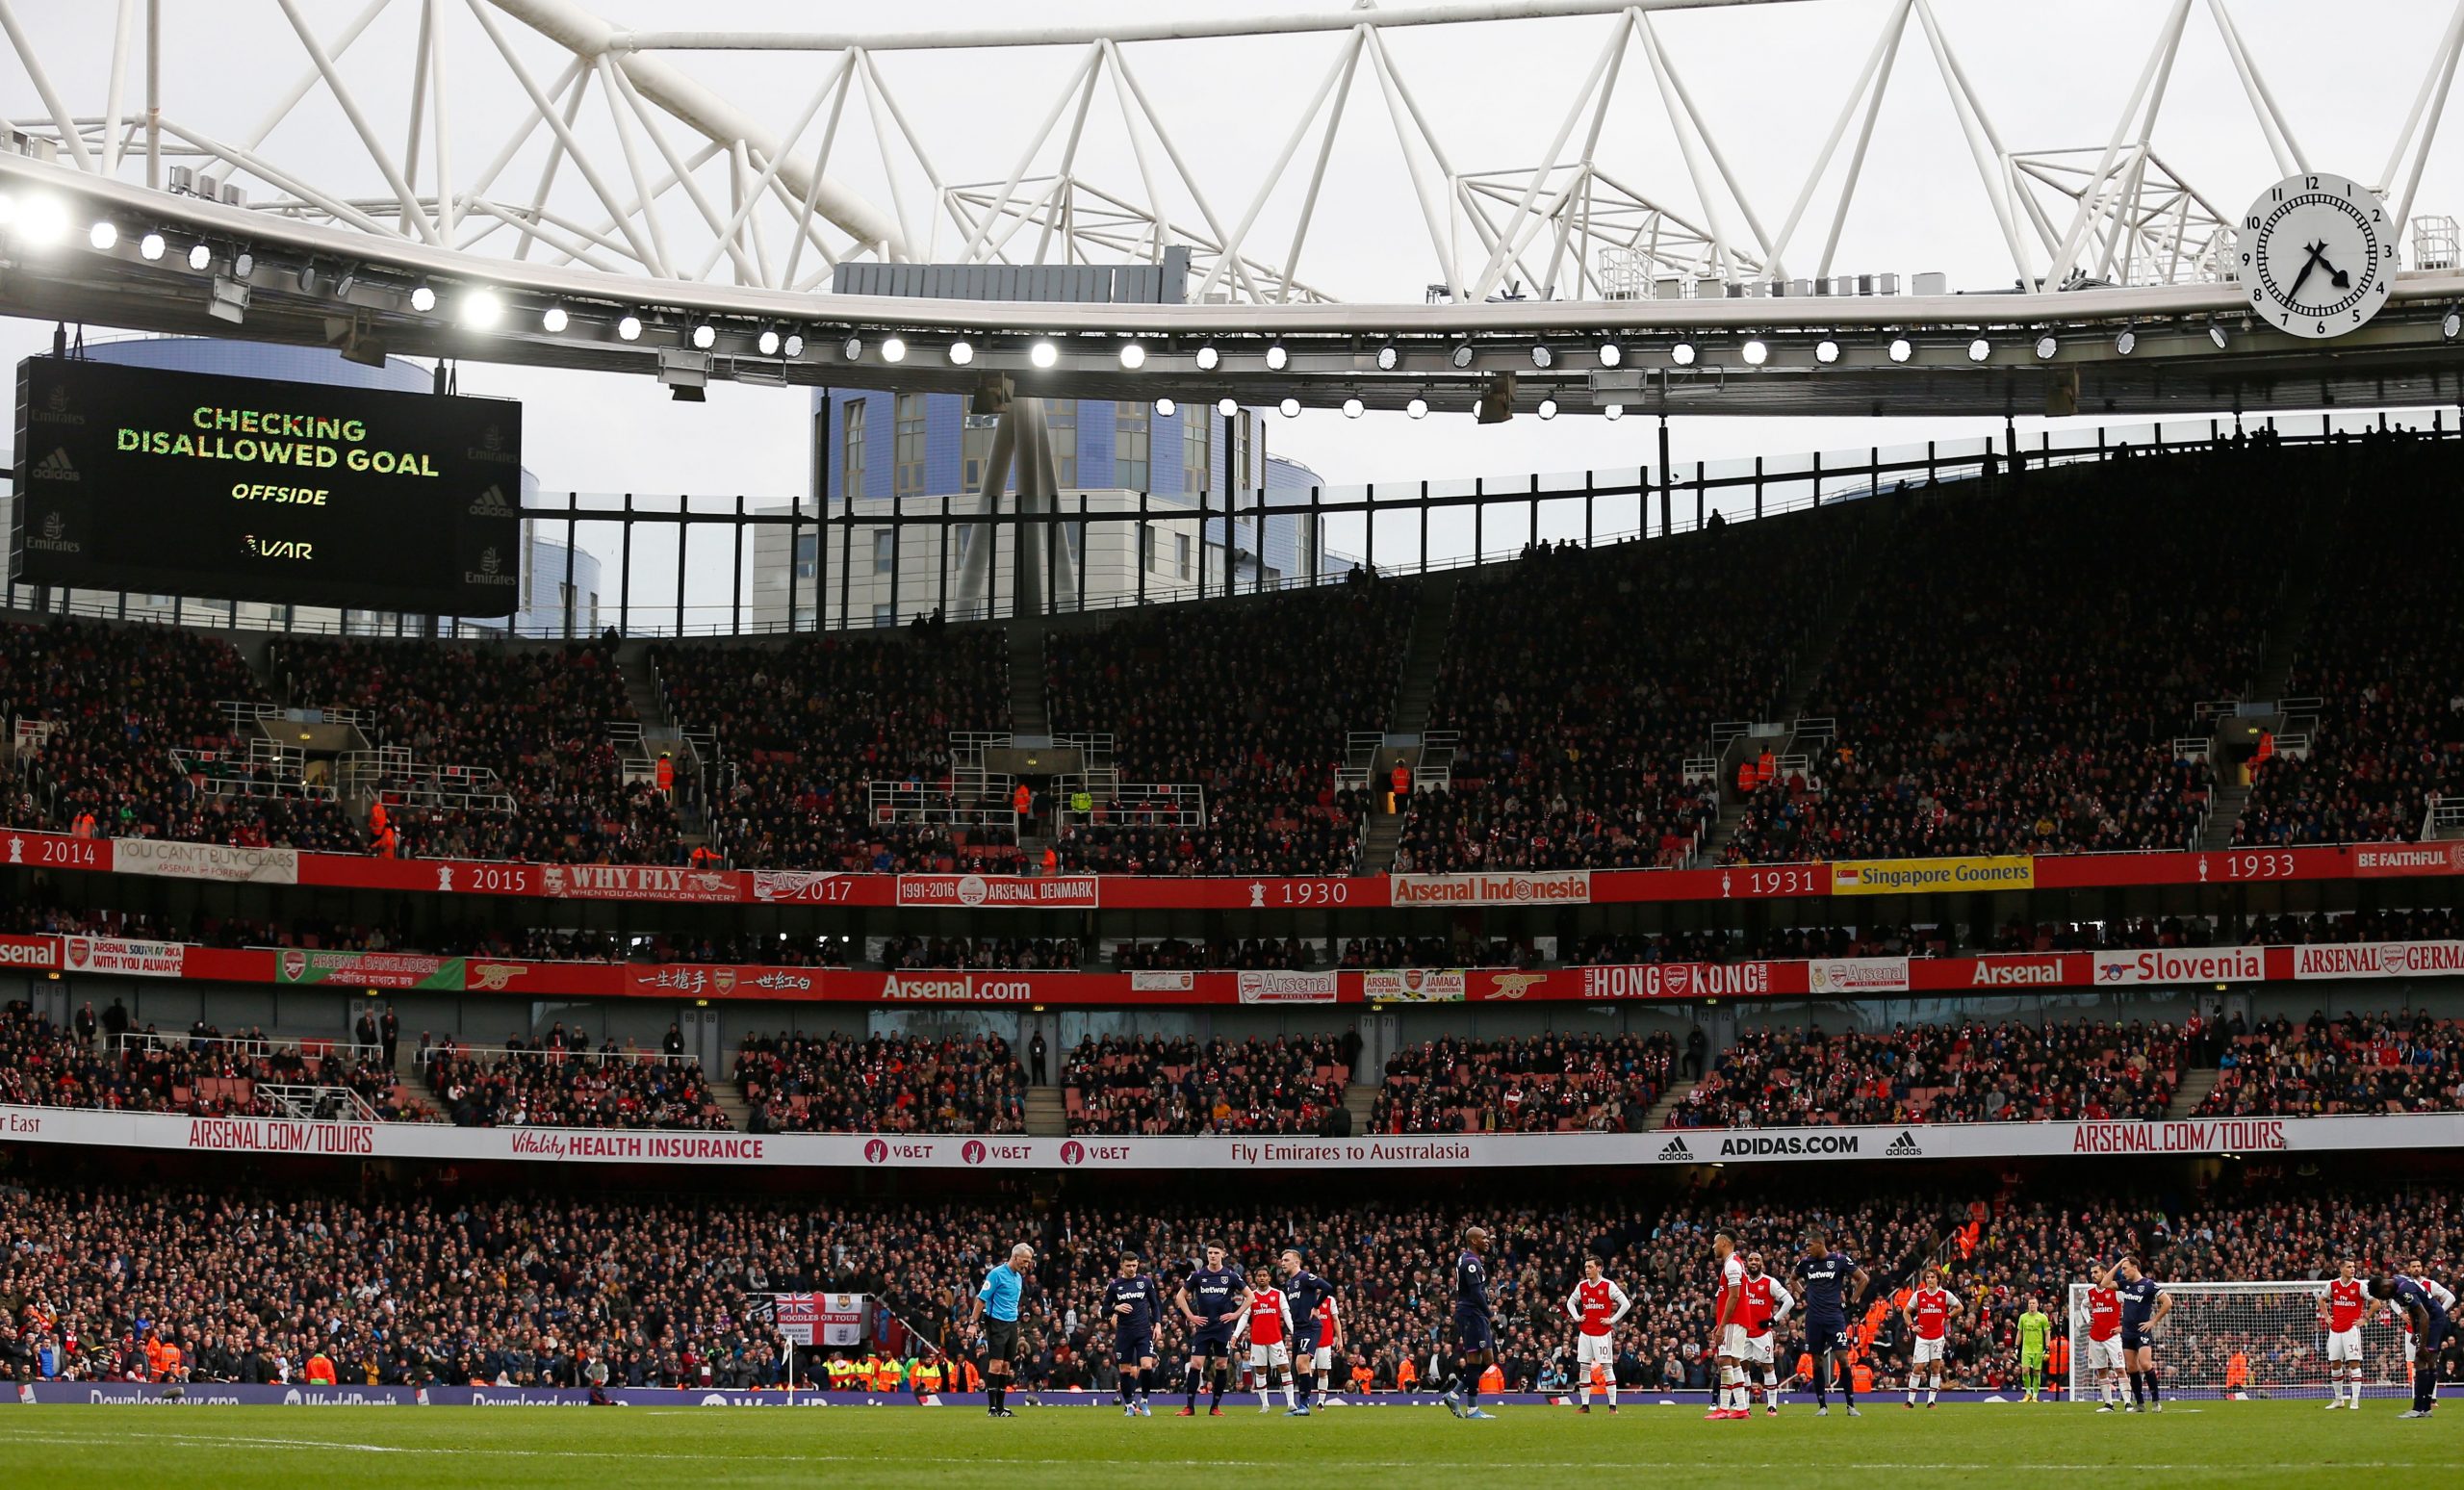 Players wait on the pitch while a VAR (Video Assistant Referee) review is conducted before awarding a goal to Arsenal during the English Premier League football match between Arsenal and West Ham at the Emirates Stadium in London on March 7, 2020.